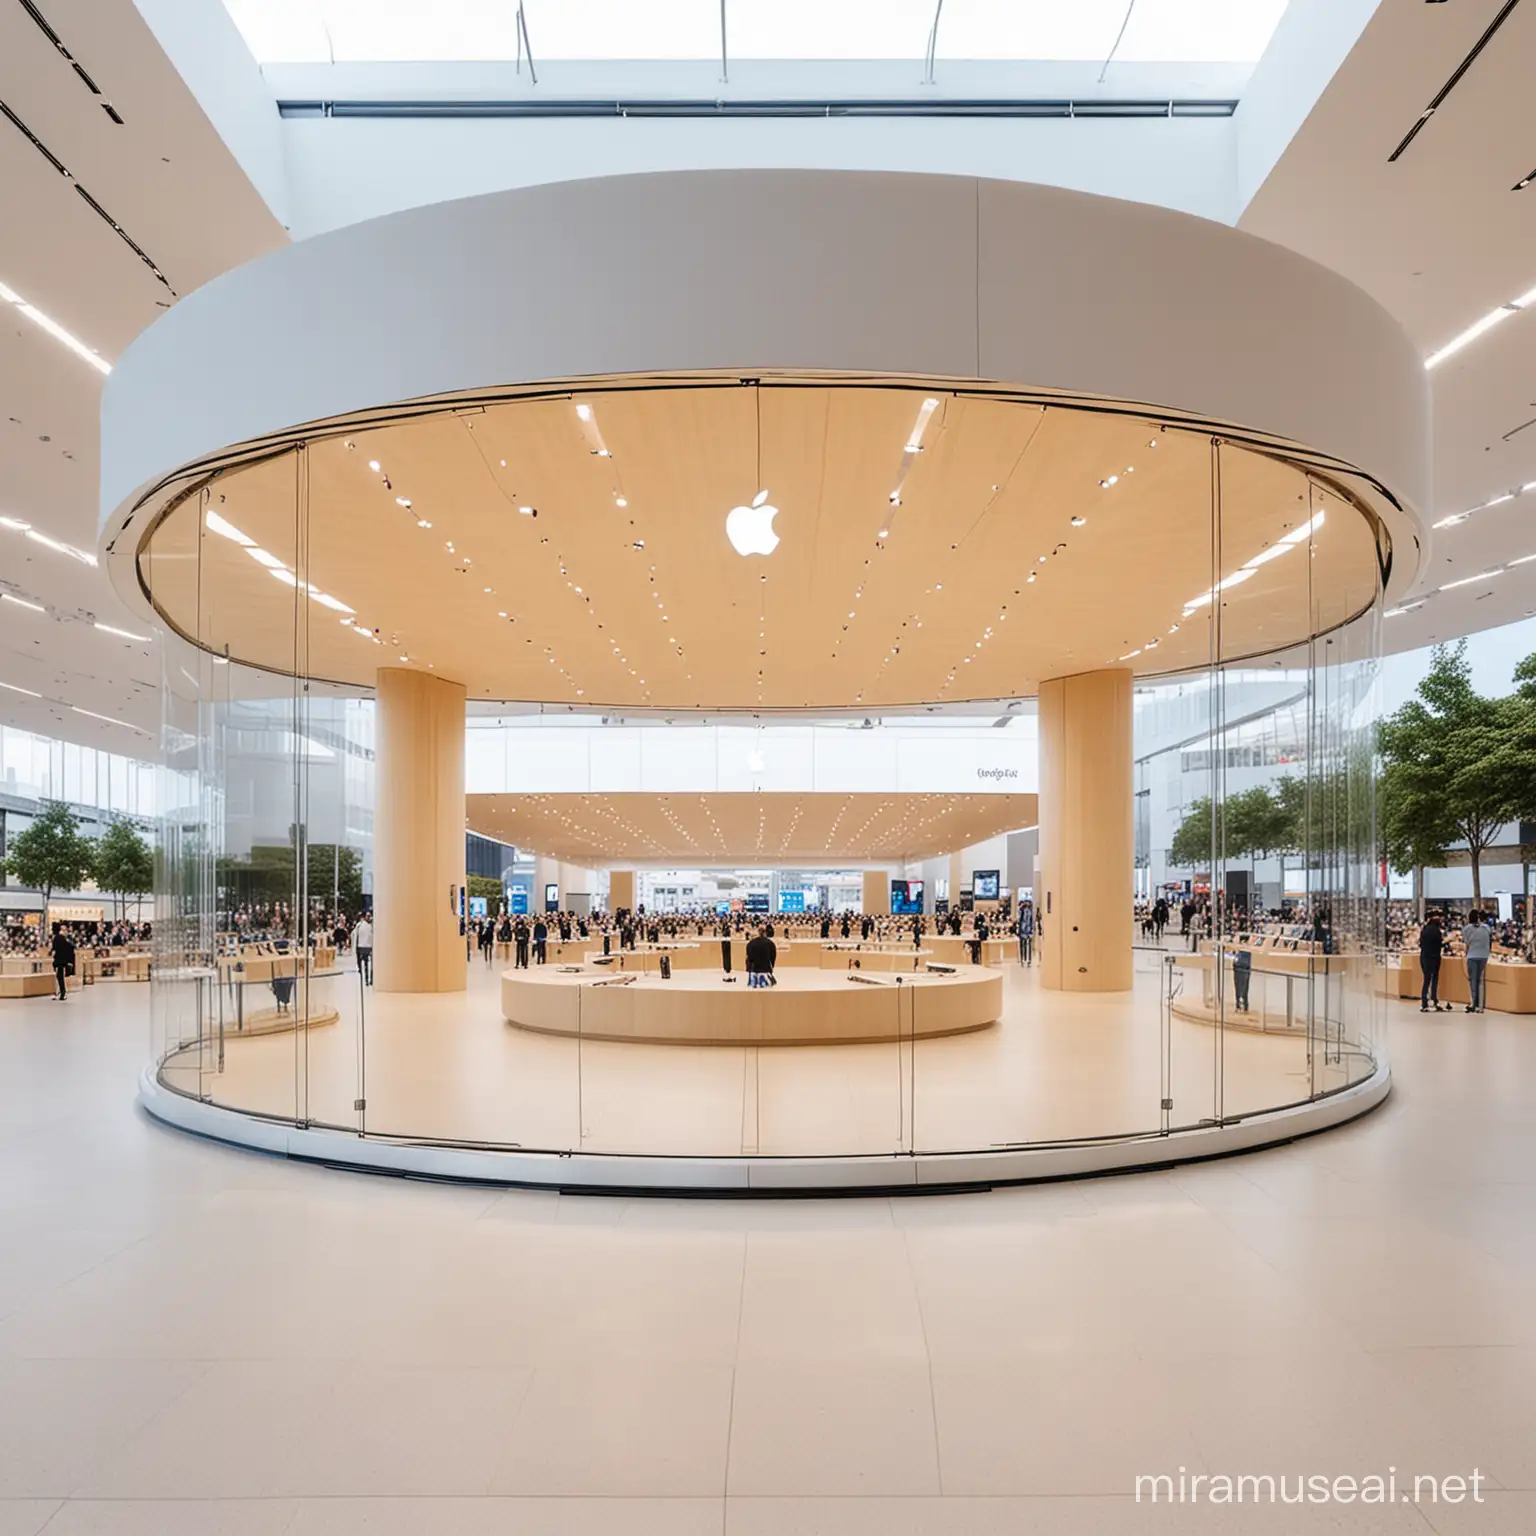 Elliptical Apple store called TROY located in a sunny shopping mall